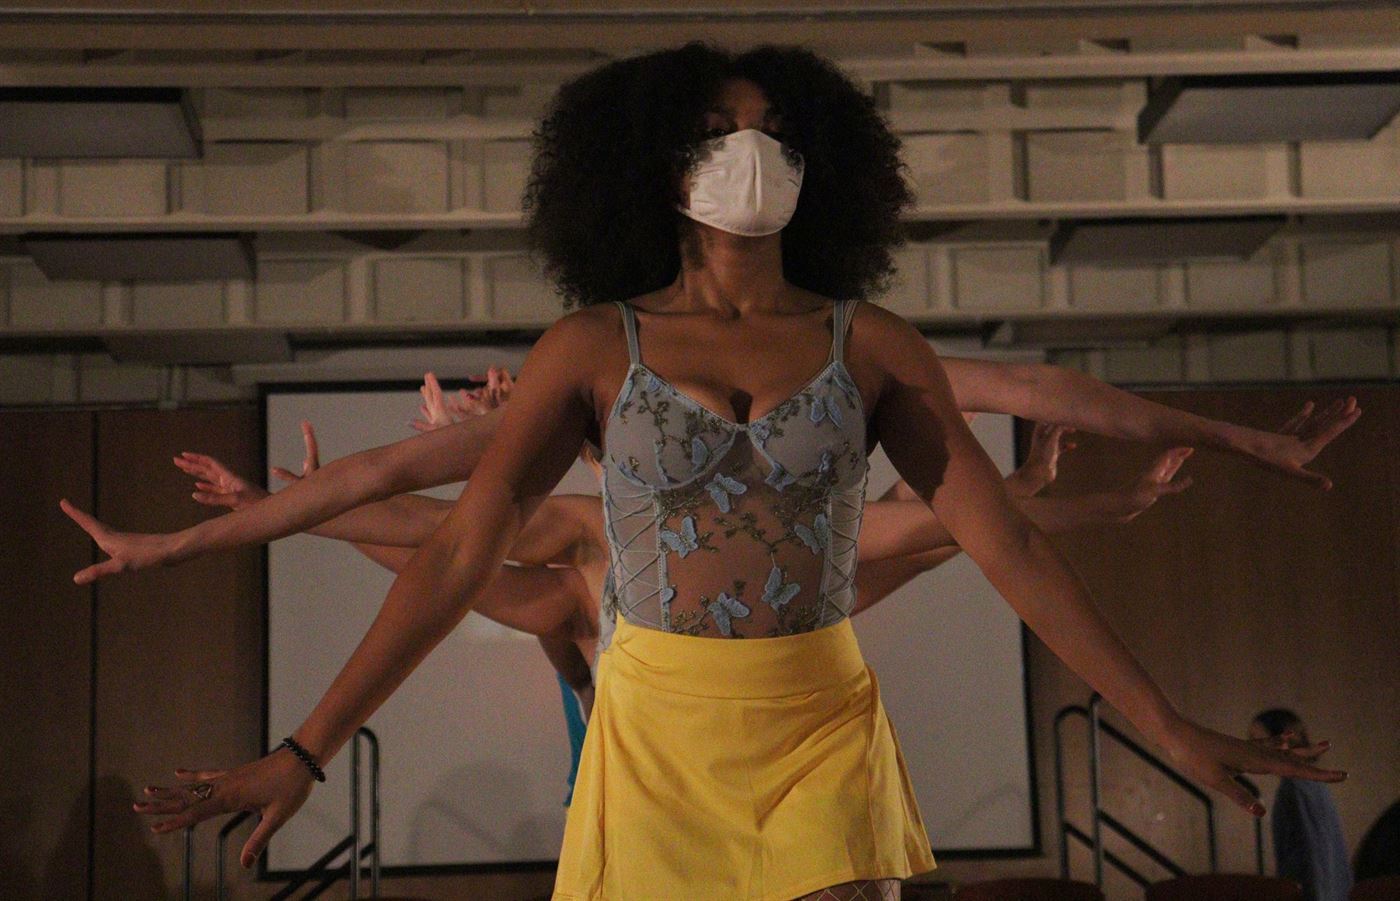 Jannette Fisher, a junior production management major with a concentration in costume design, leads the "Hot Lips" in an opening dance number. John LaRosa | The Montclarion